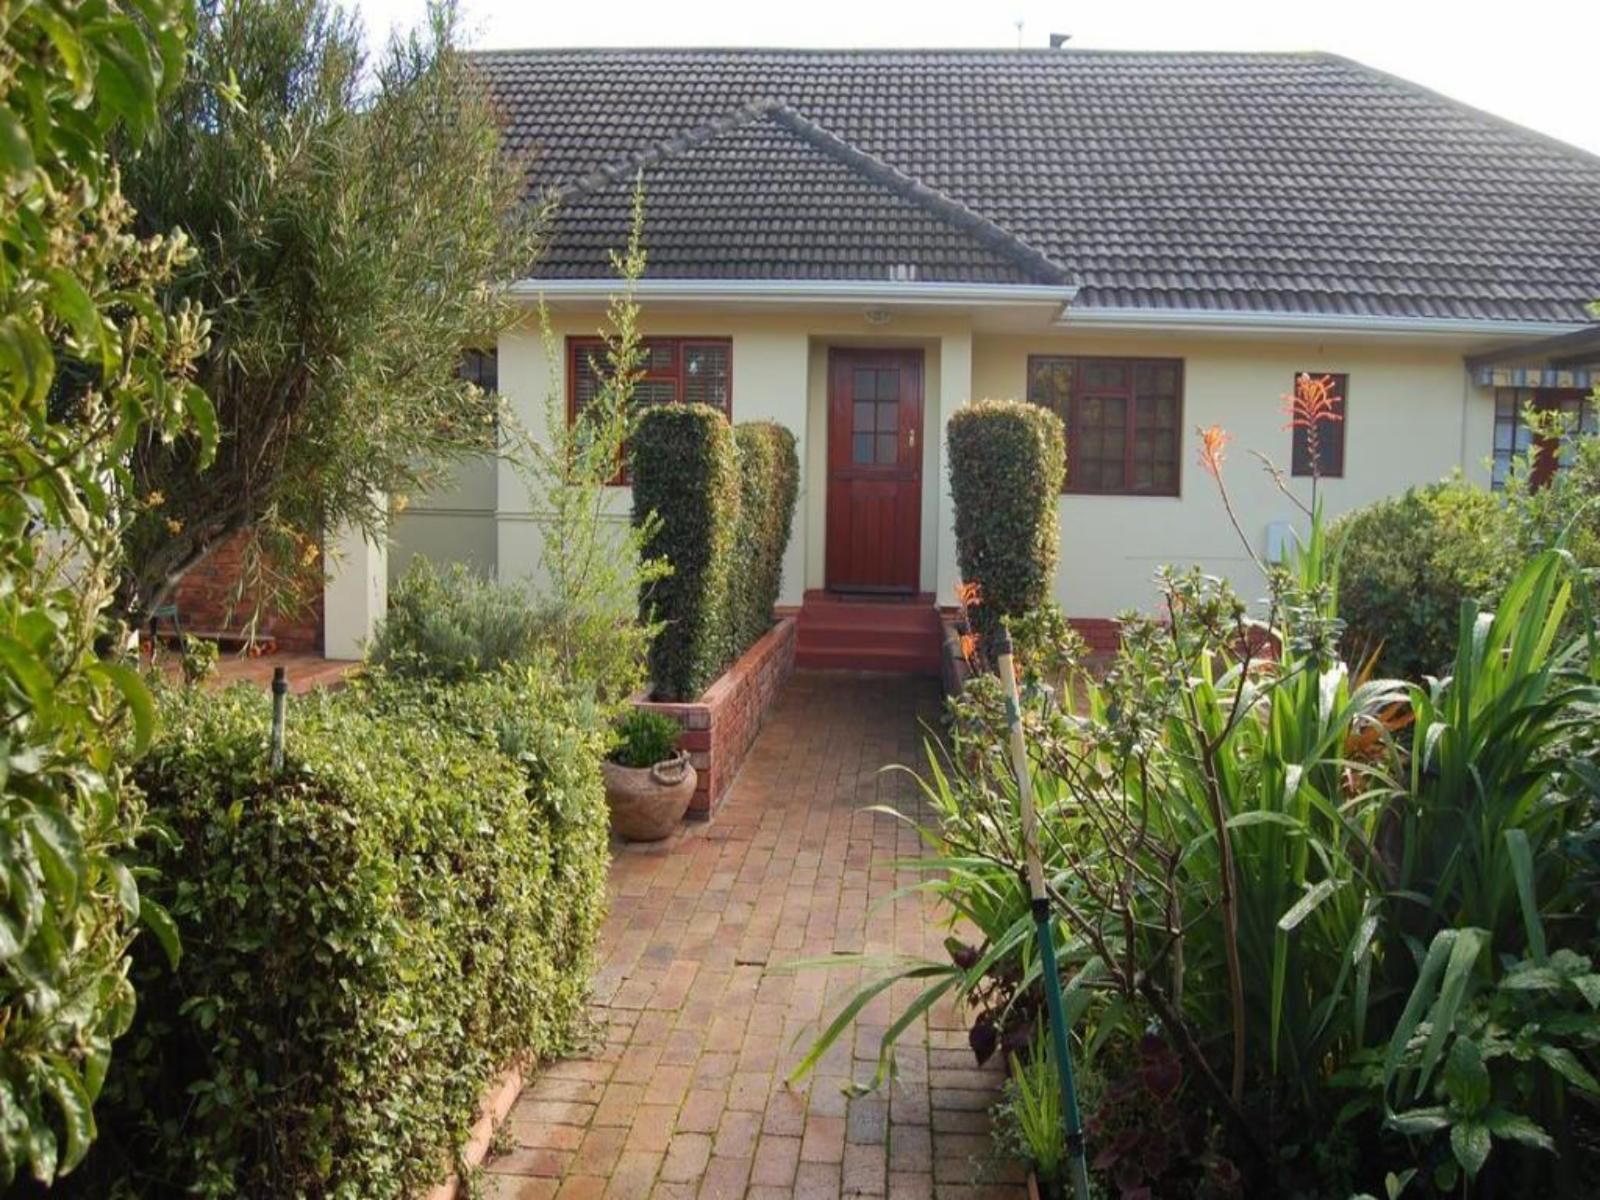 Ascot Gardens Self Catering Bergvliet Cape Town Western Cape South Africa House, Building, Architecture, Garden, Nature, Plant